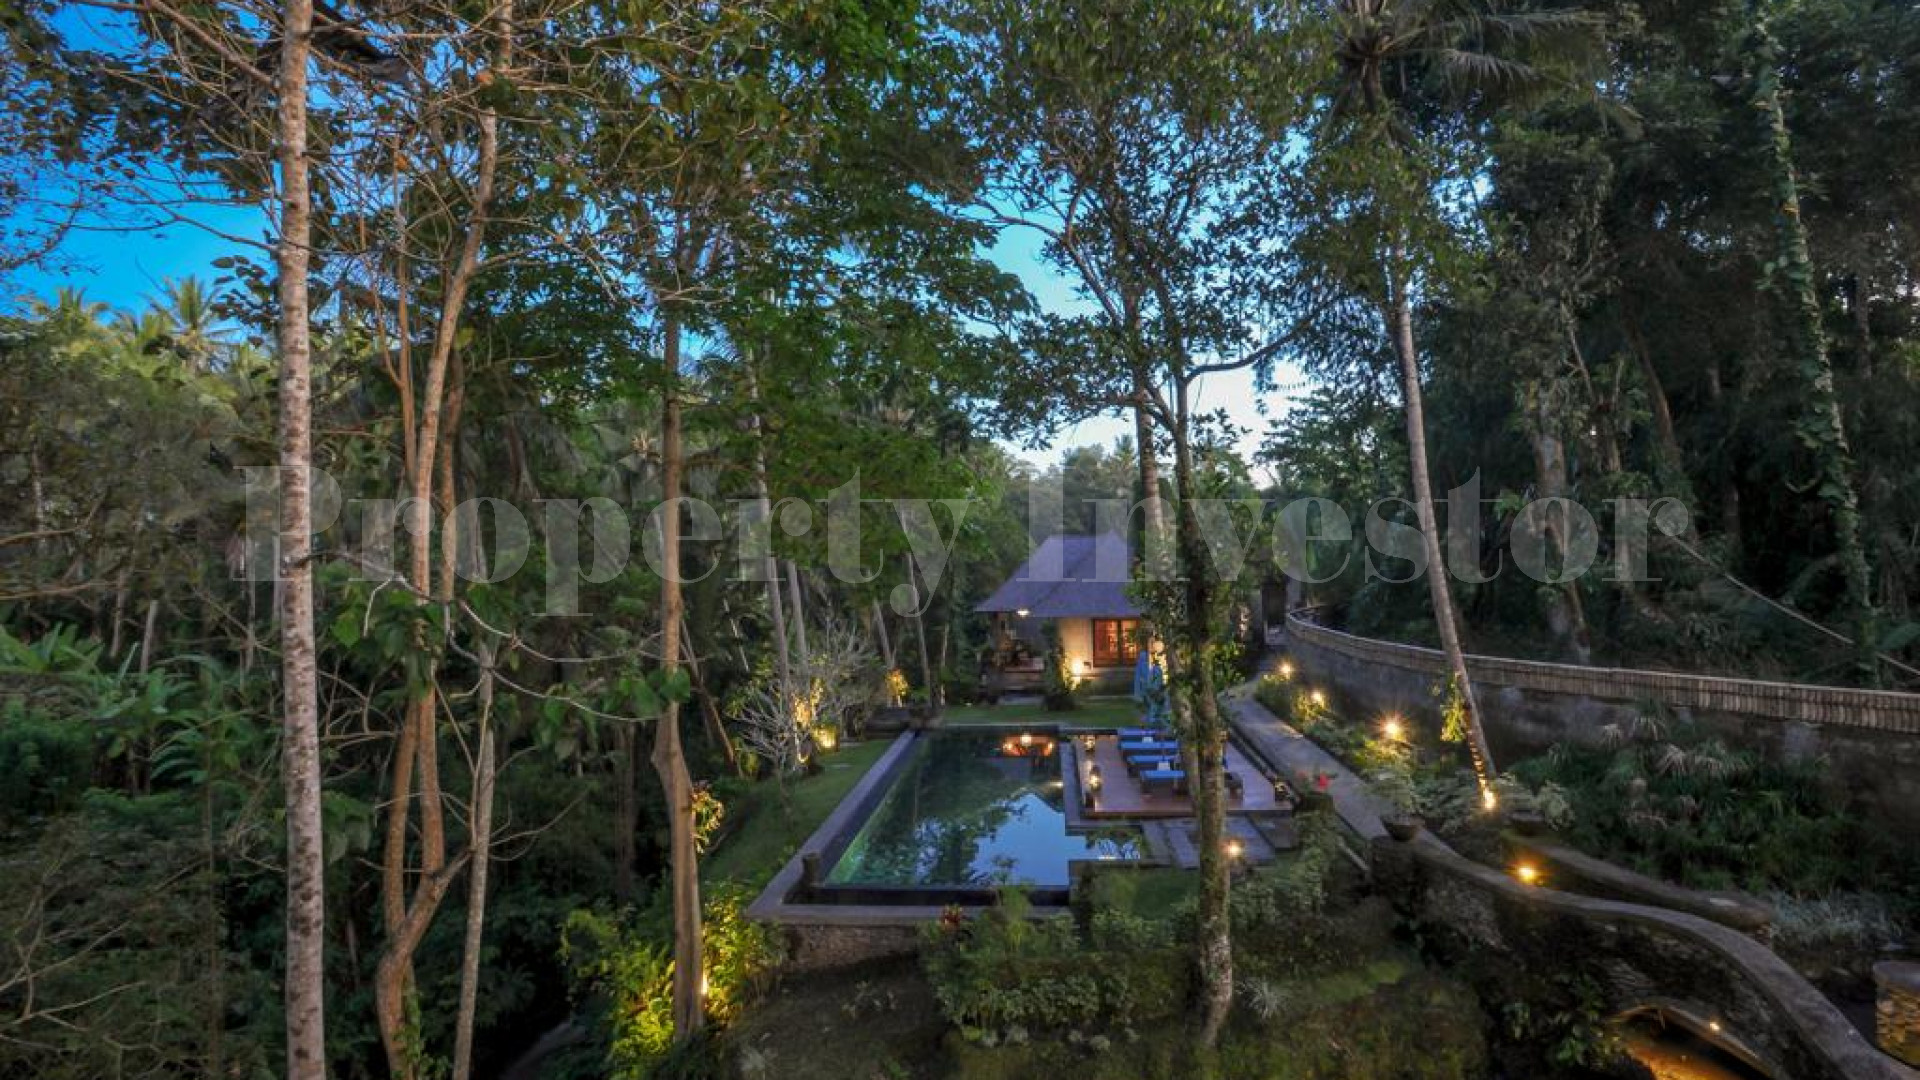 Newly Renovated 5 Bedroom Traditional Luxury Villa with Stunning Tropical River & Jungle Views for Sale in South Ubud, Bali